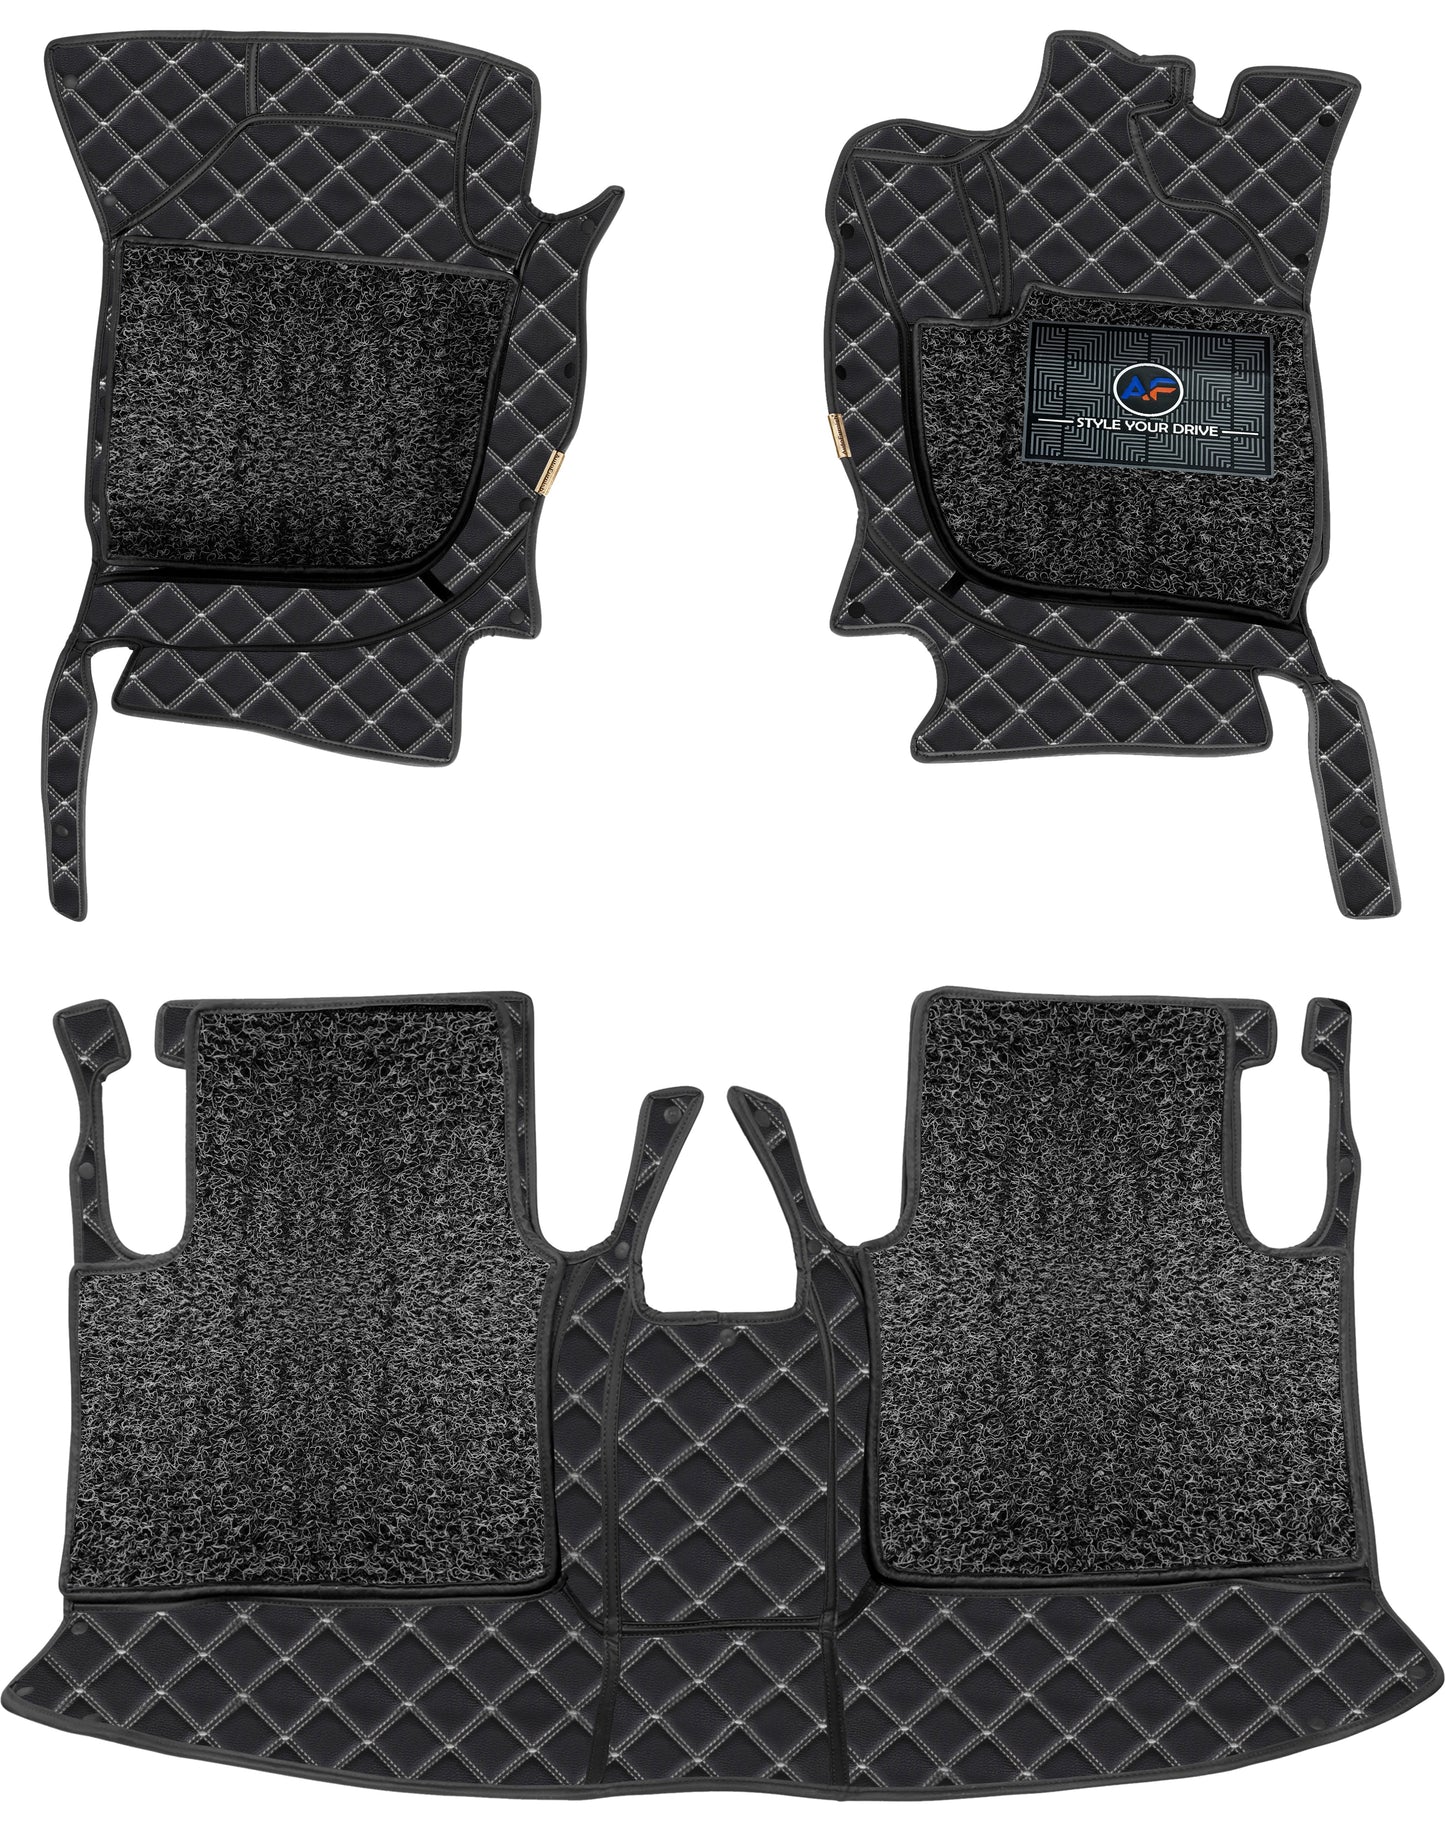 Skoda Rapid -(2011-21)-7D Luxury Car Mat, All Weather Proof, Anti-Skid, 100% Waterproof & Odorless with Unique Diamond Fish Design (24mm Luxury PU Leather, 2 Rows)